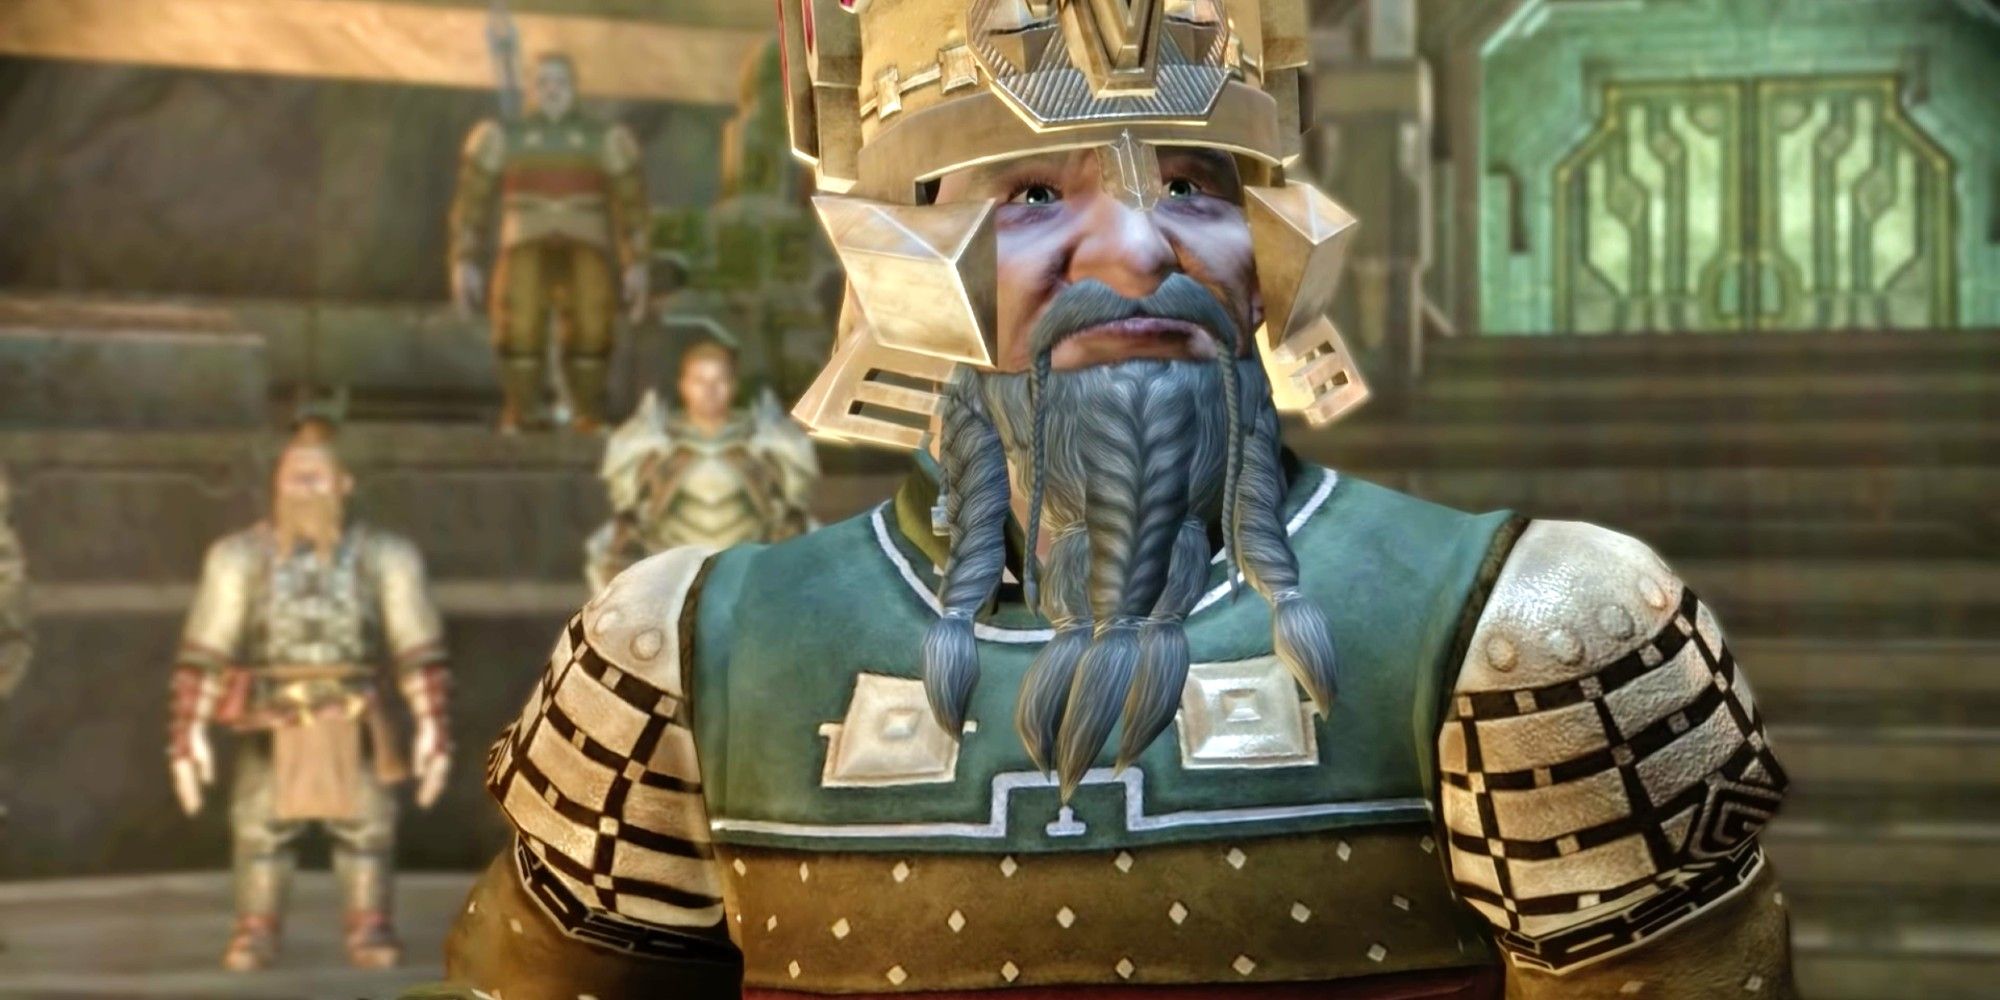 Crowned Lord Harrowmon looks at the crowd after becoming king - Dragon Age Origins